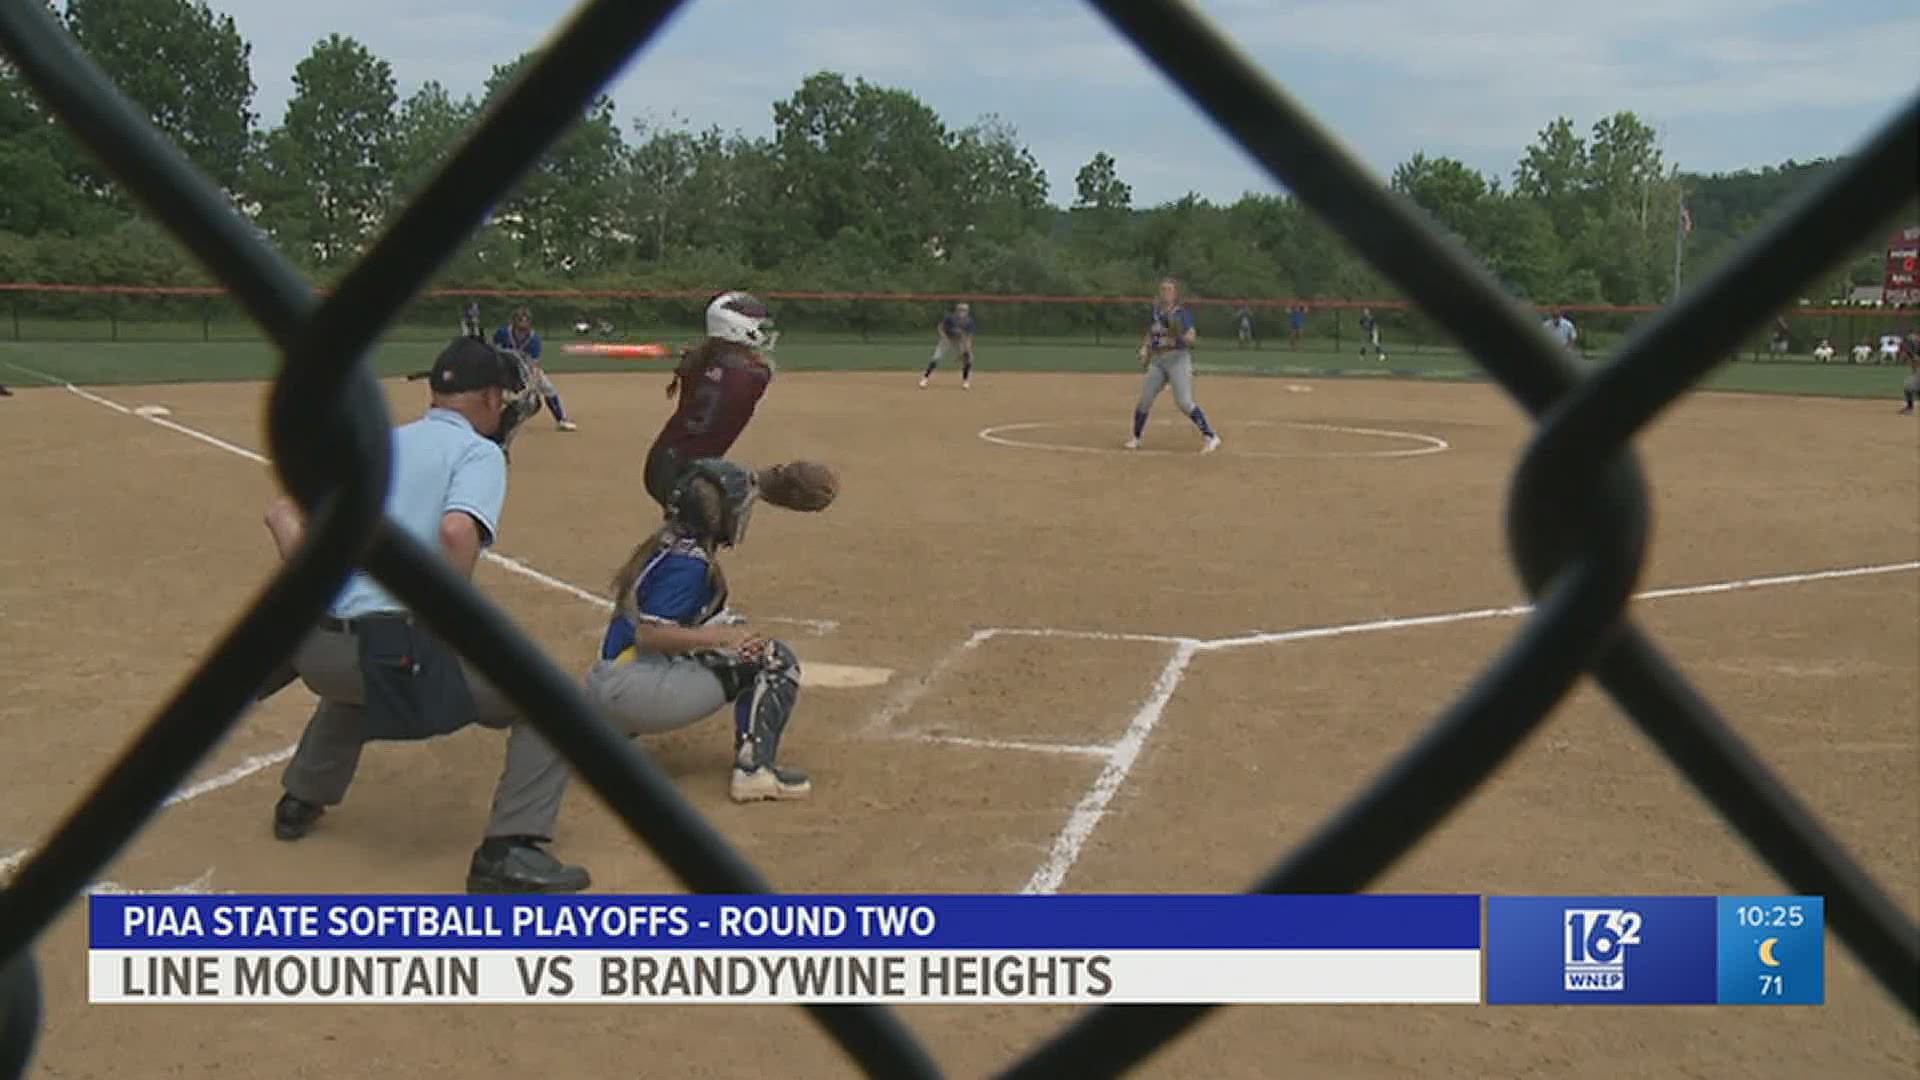 Line Mountain beat Brandywine Heights 4-0 in 8 innings in the State Softball Quarterfinals.